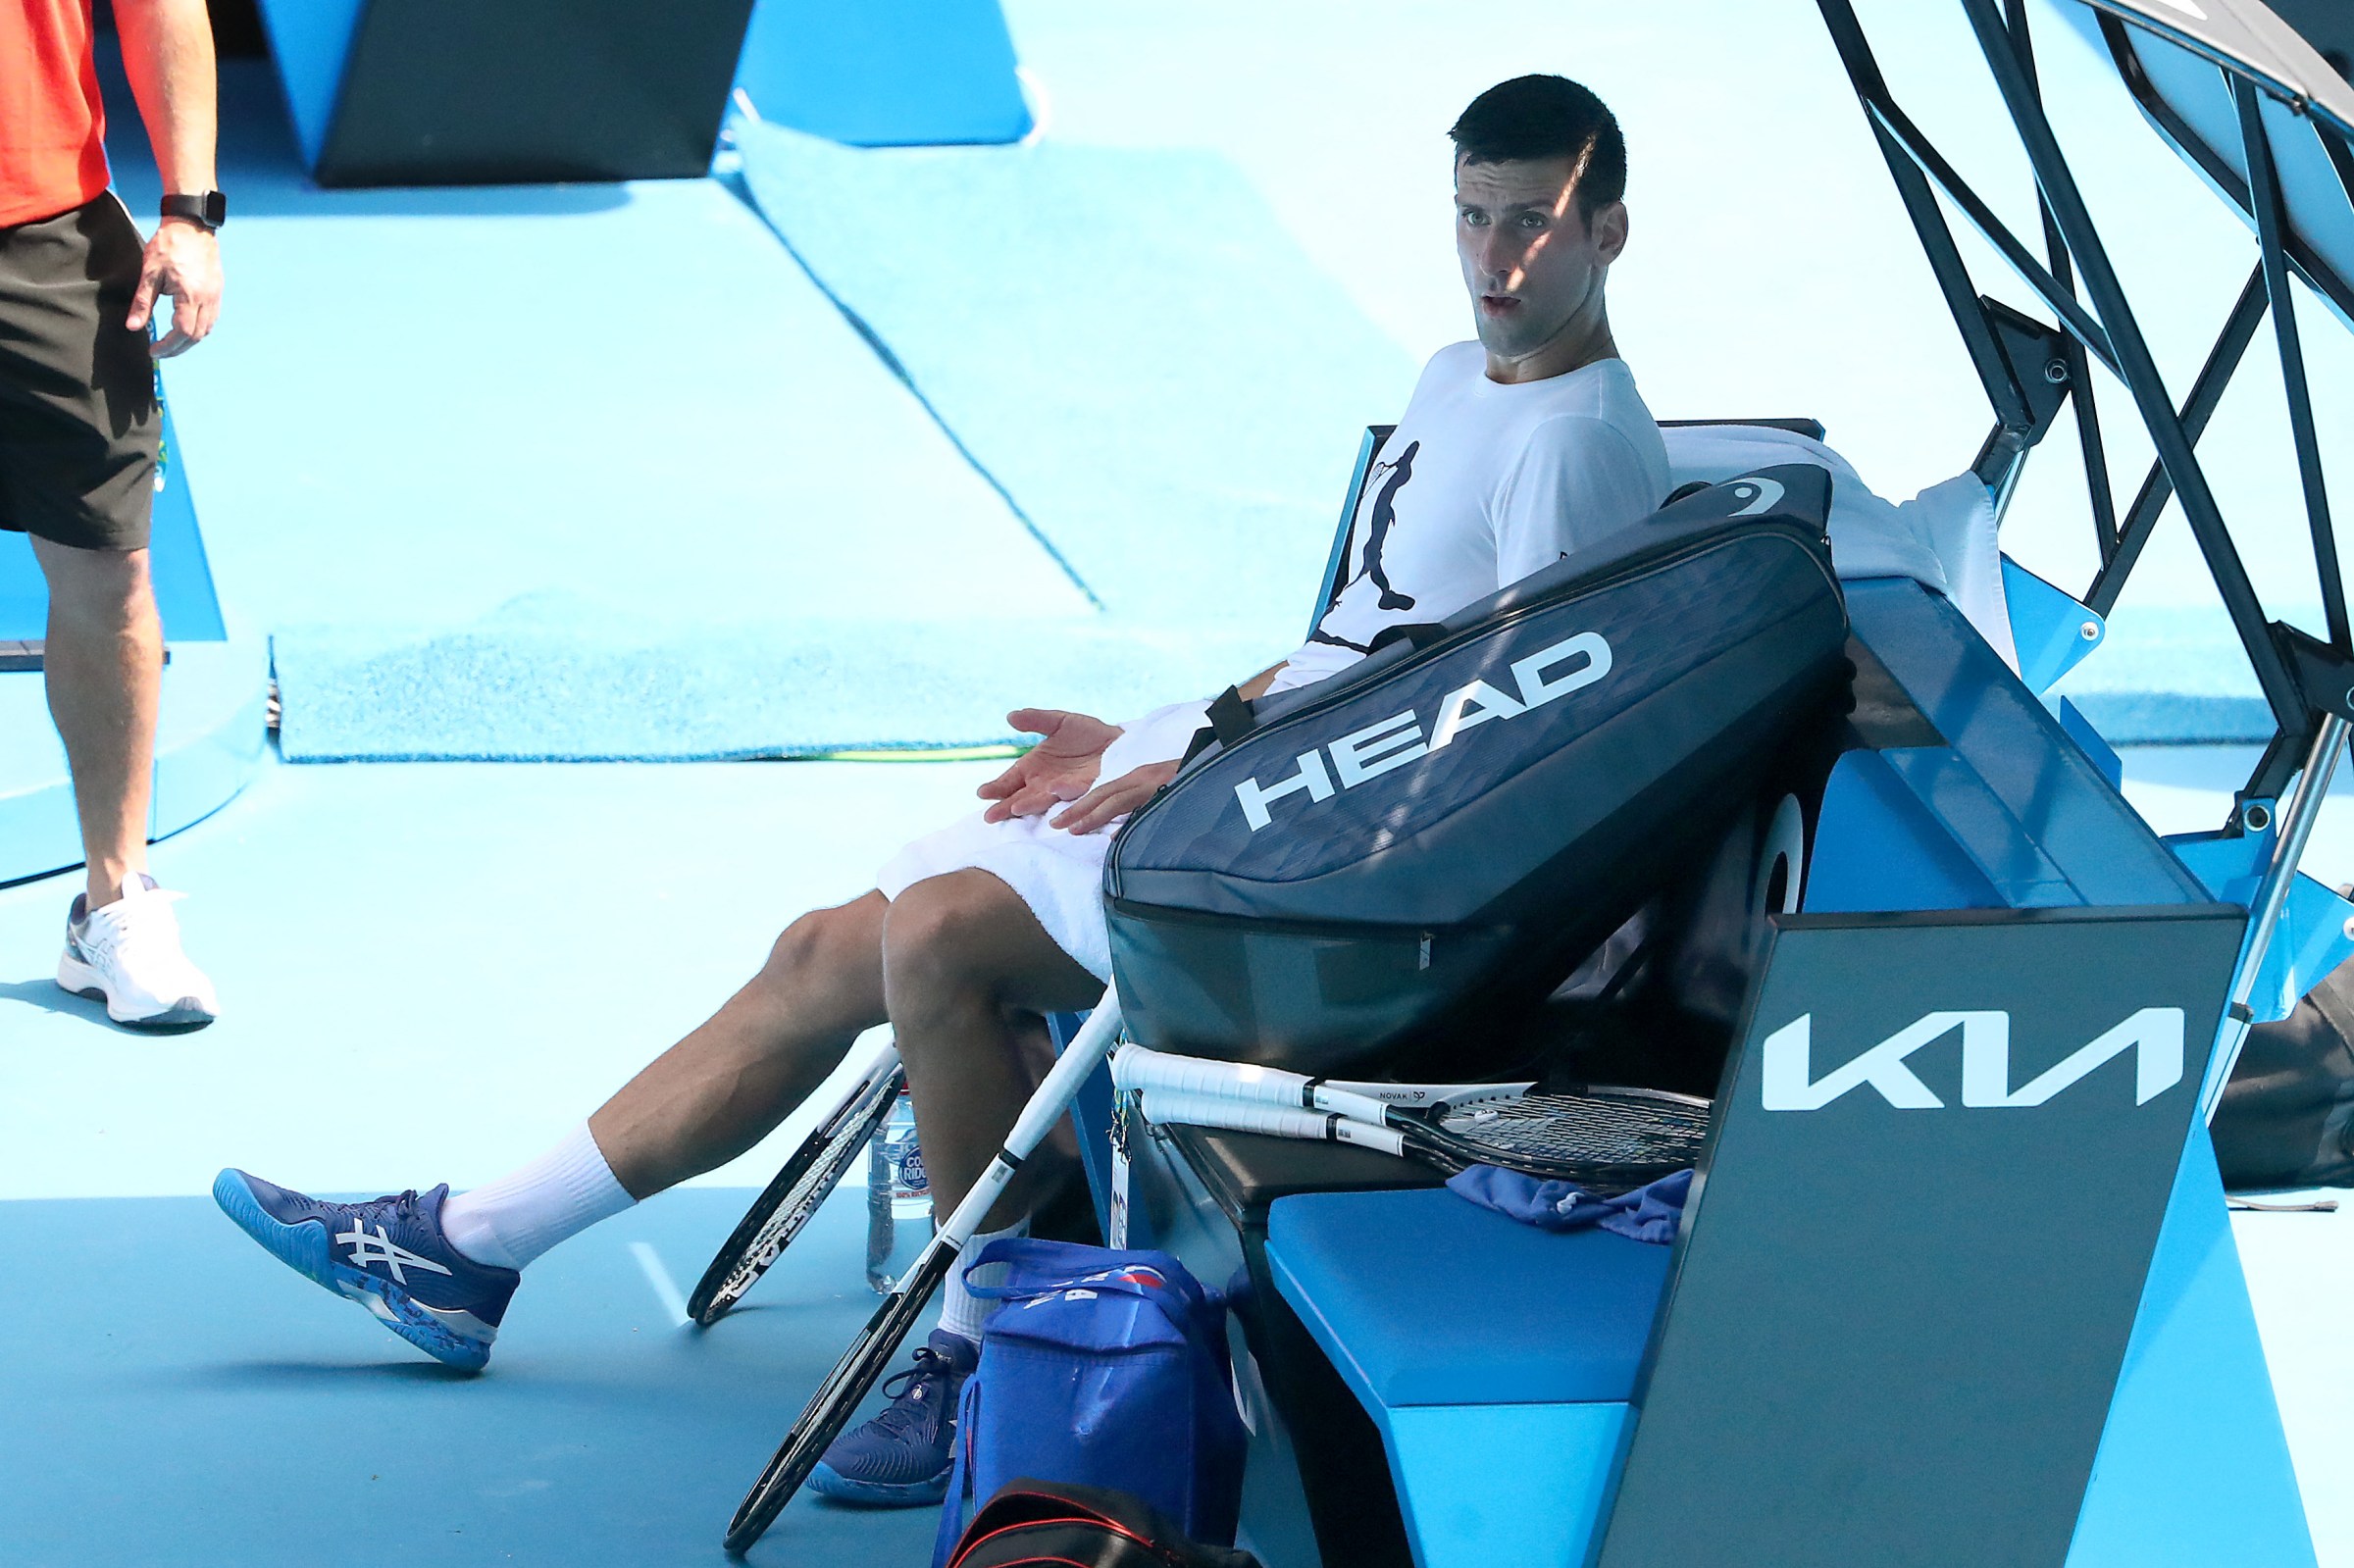 Novak Djokovic sits down while practicing on the grounds of the Australian Open.